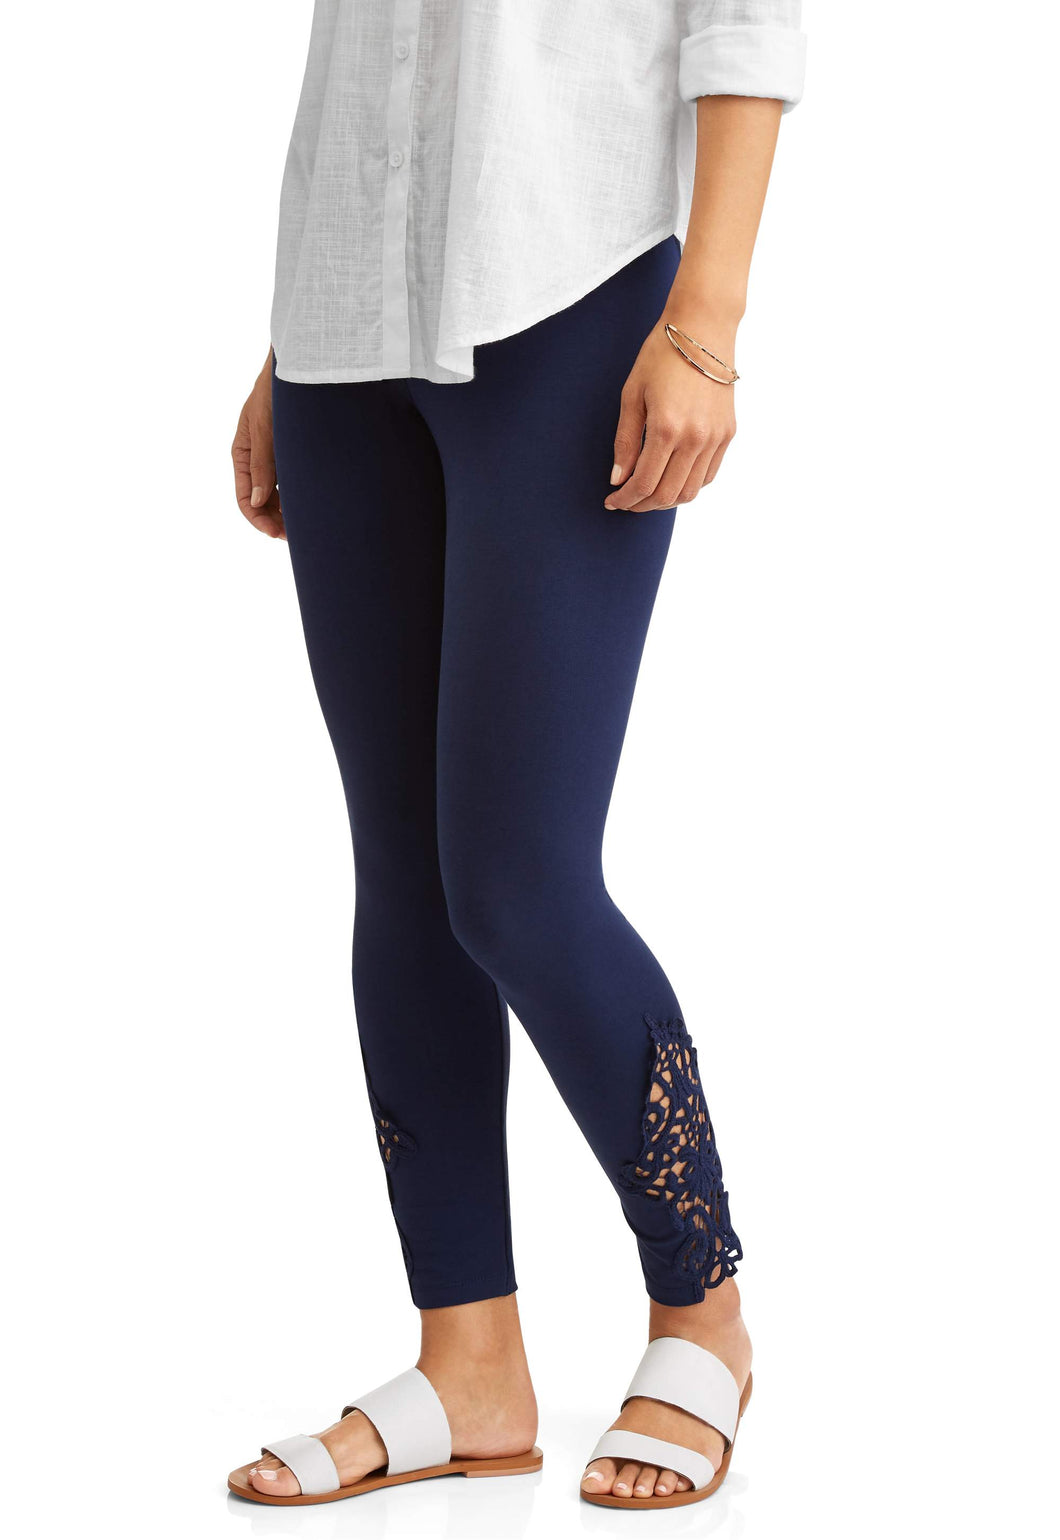 Women's Legging With Lace Inset Ankle